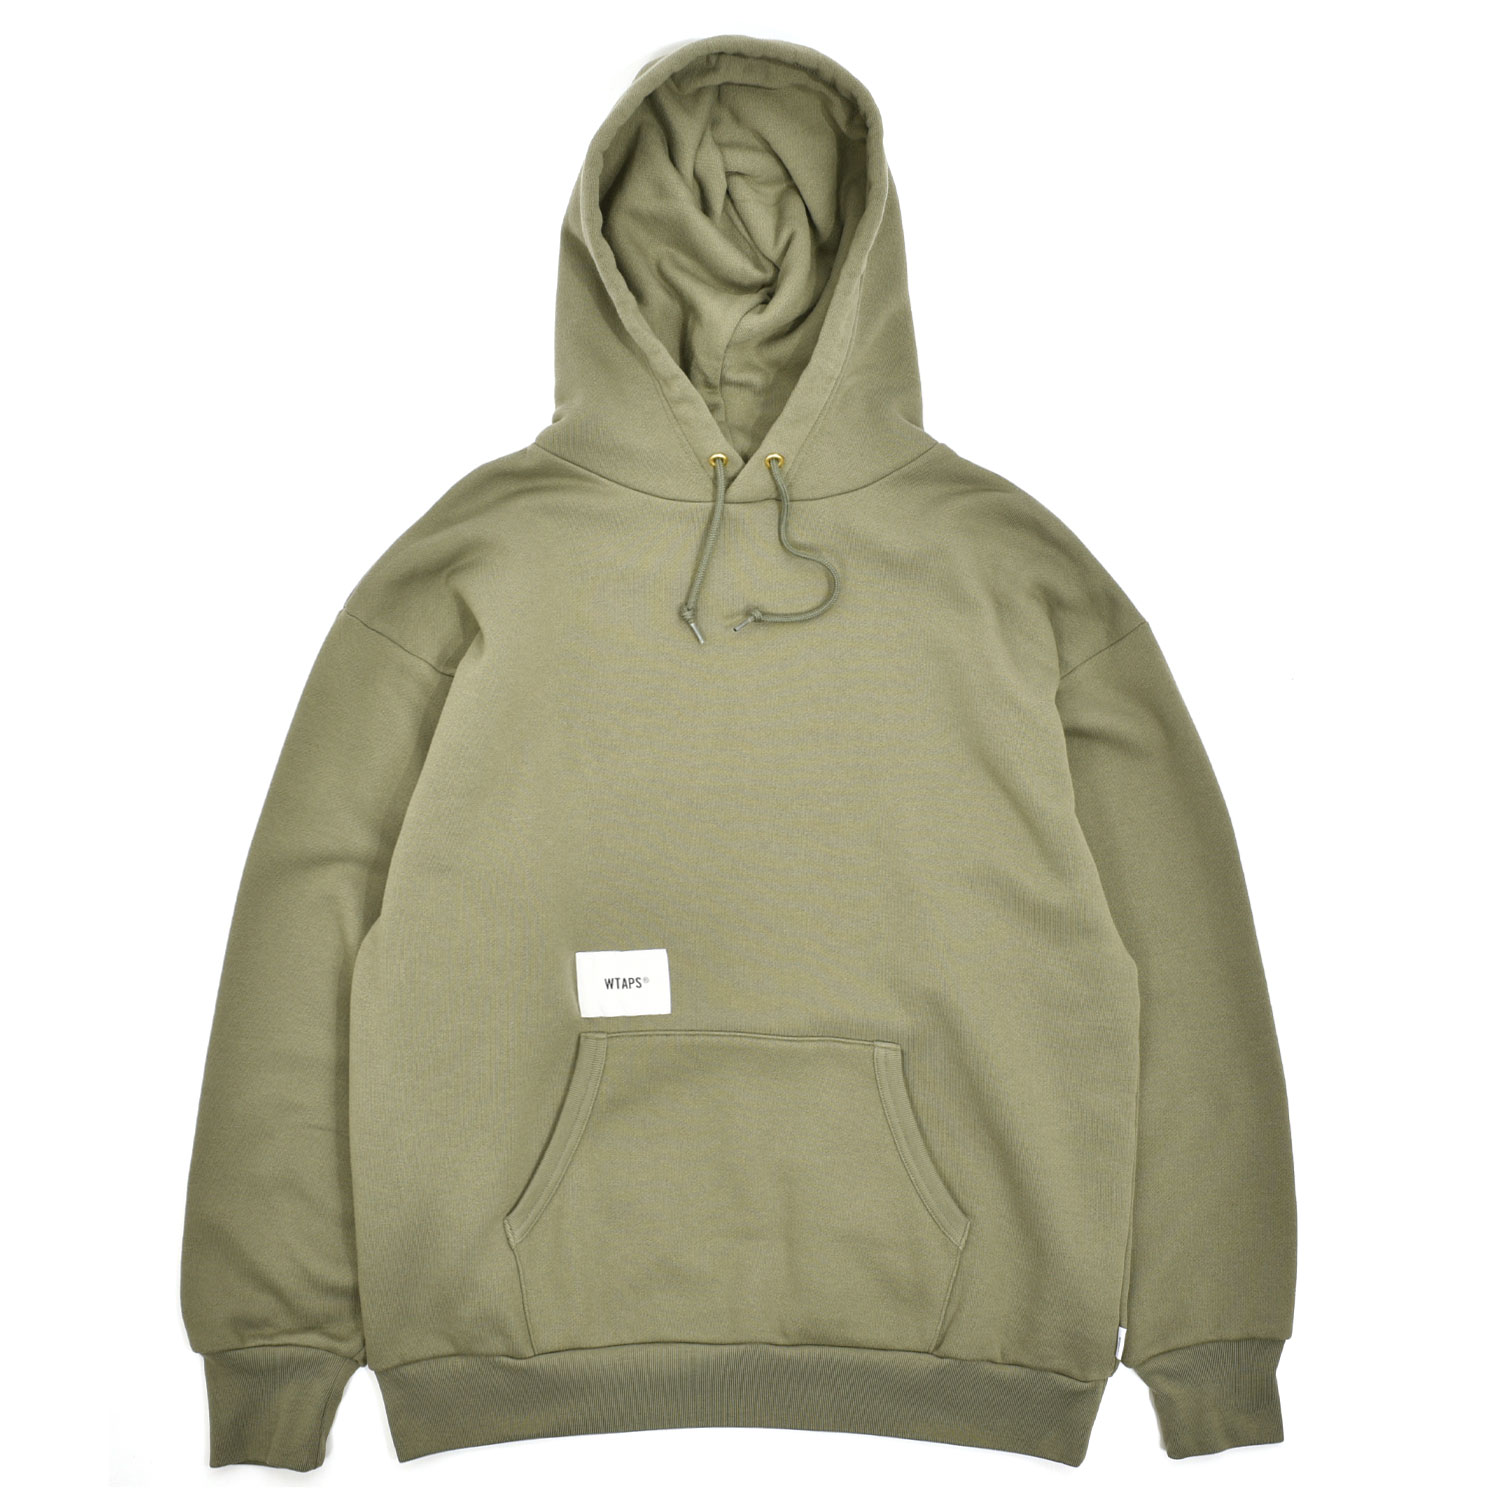 WTAPS ACADEMY / HOODED / COTTON-